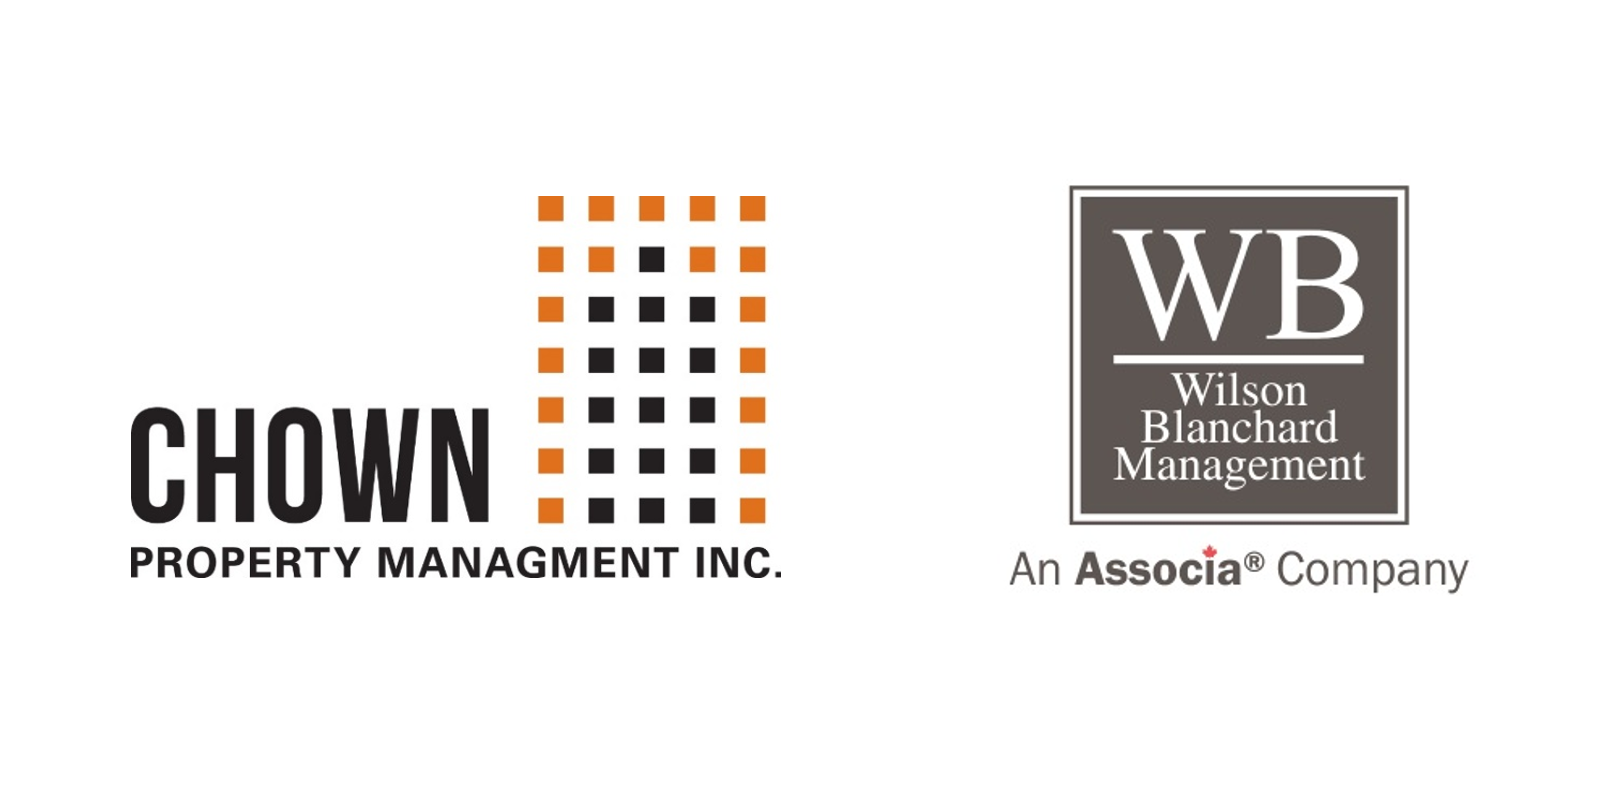 Chown Property Management merging with Wilson Blanchard Management